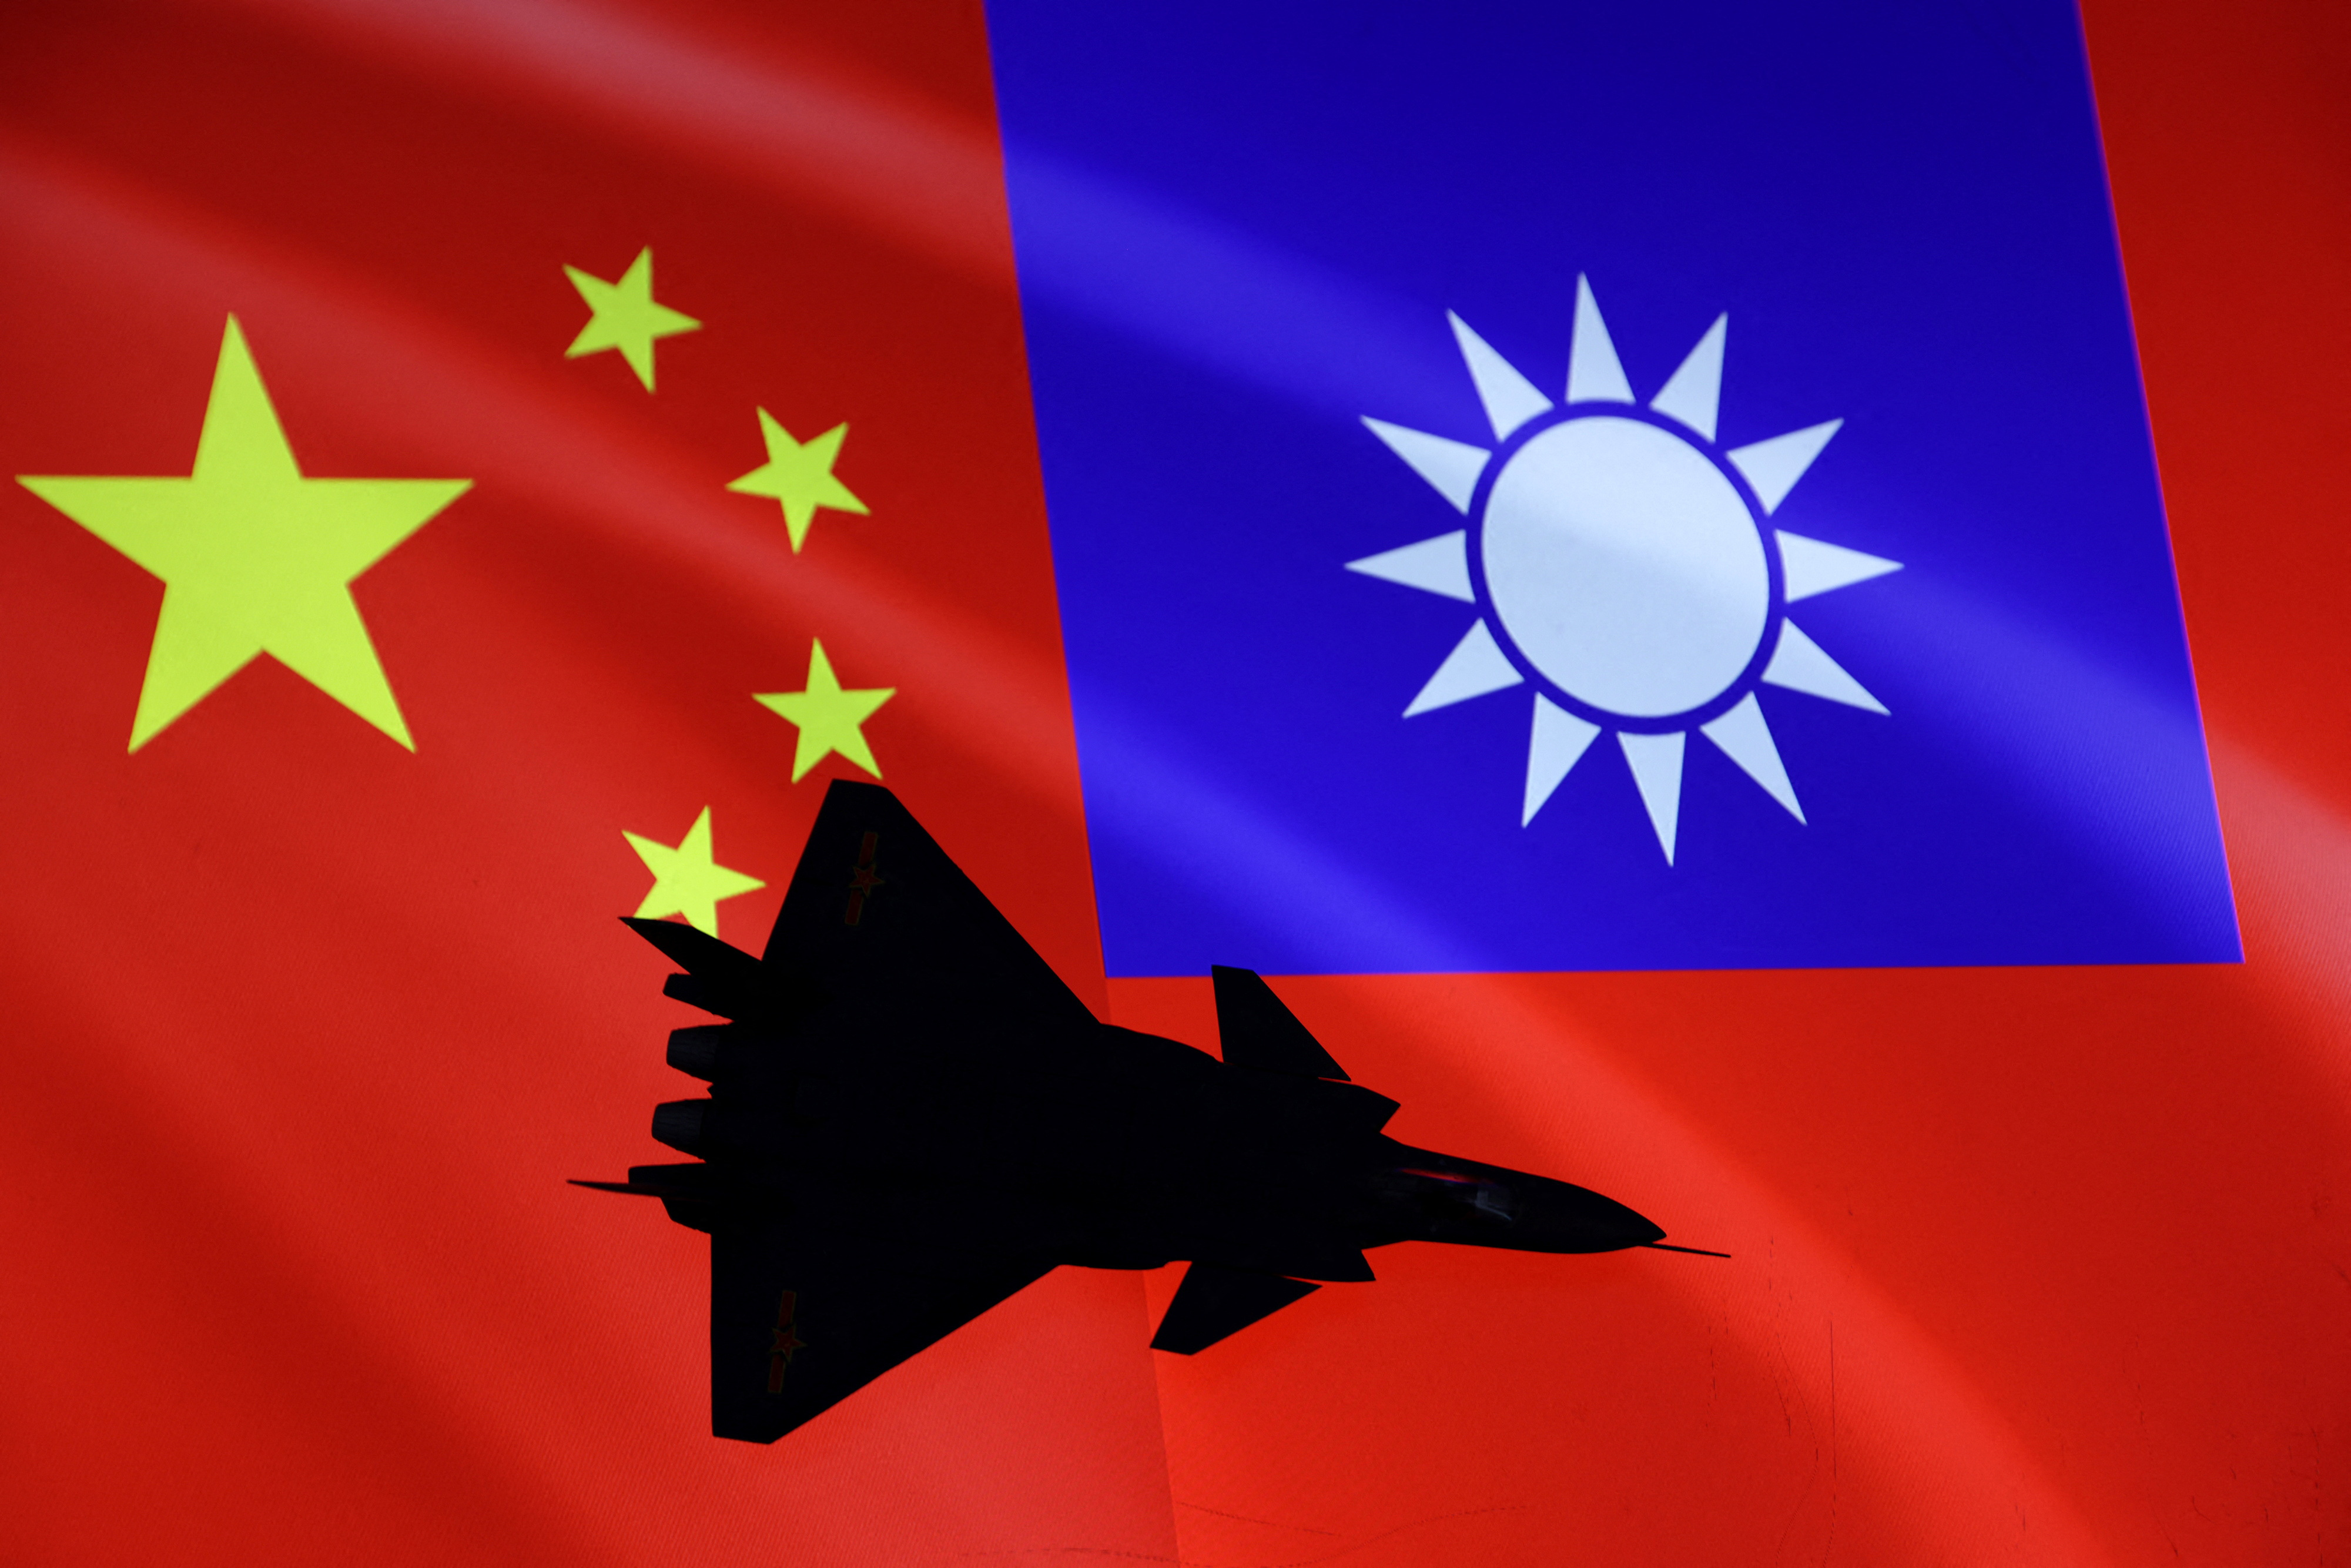 Illustration shows airplane, Chinese and Taiwanese flags